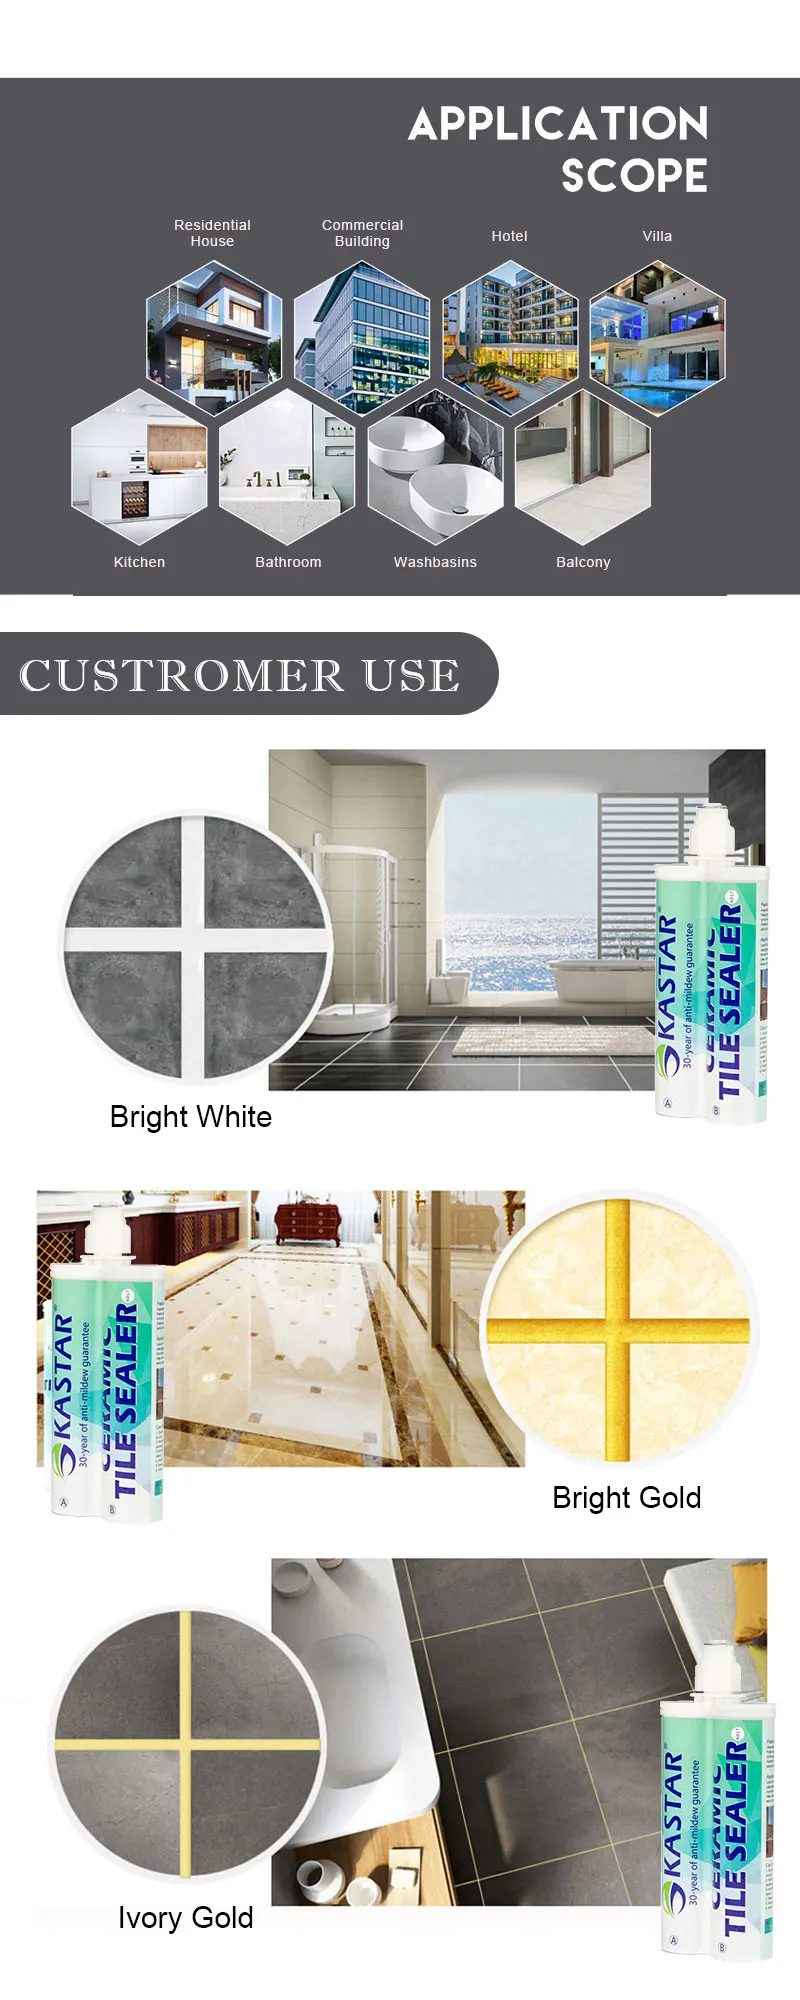 China Wholesale Waterproof High Flexibility Non-shrink Gold Colored Tile Grout Sealer